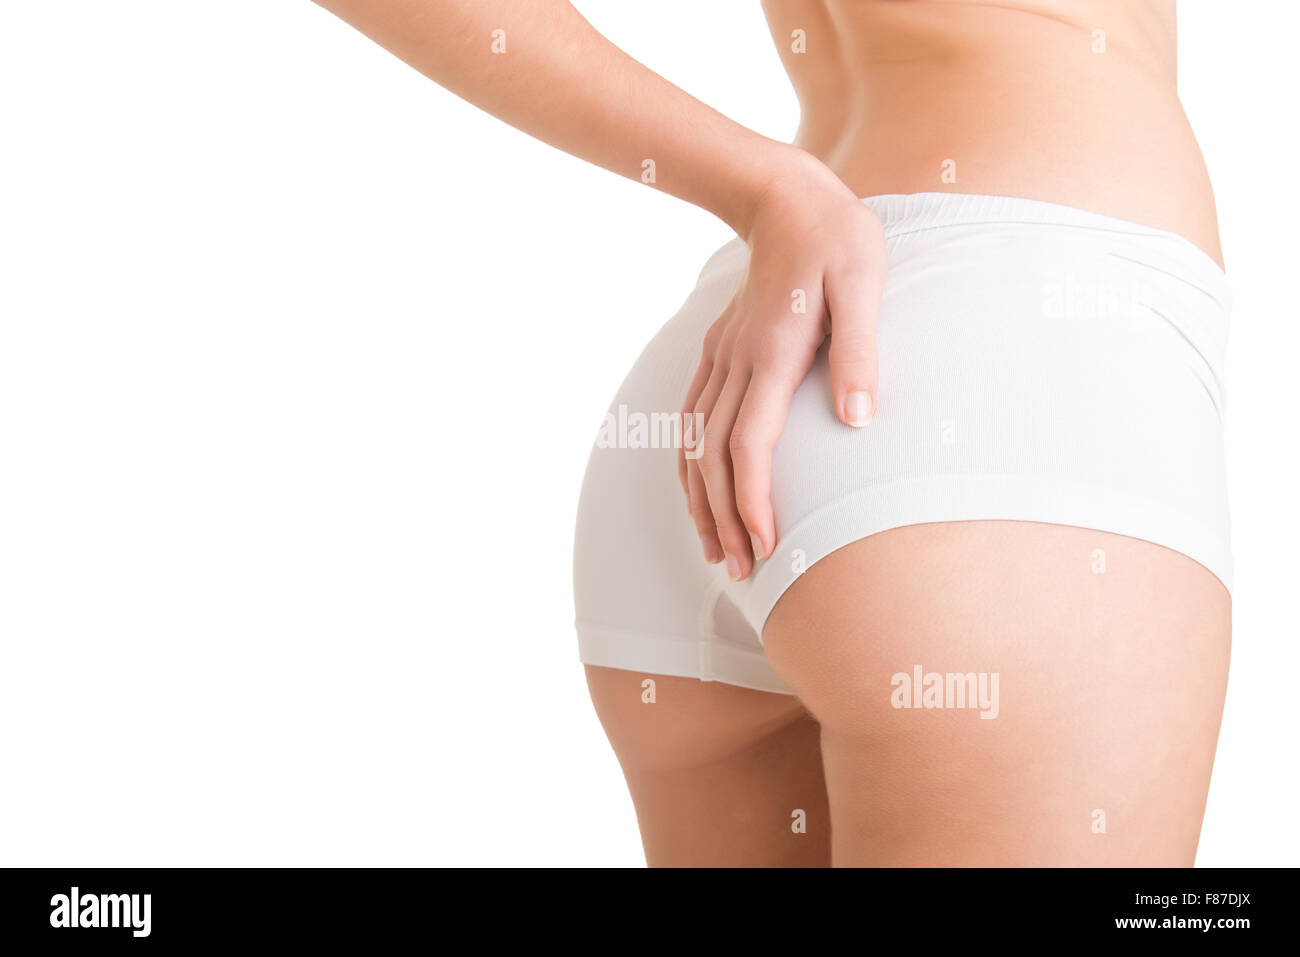 Closeup of woman examining her buttocks looking dor cellulite, isolated in white Stock Photo